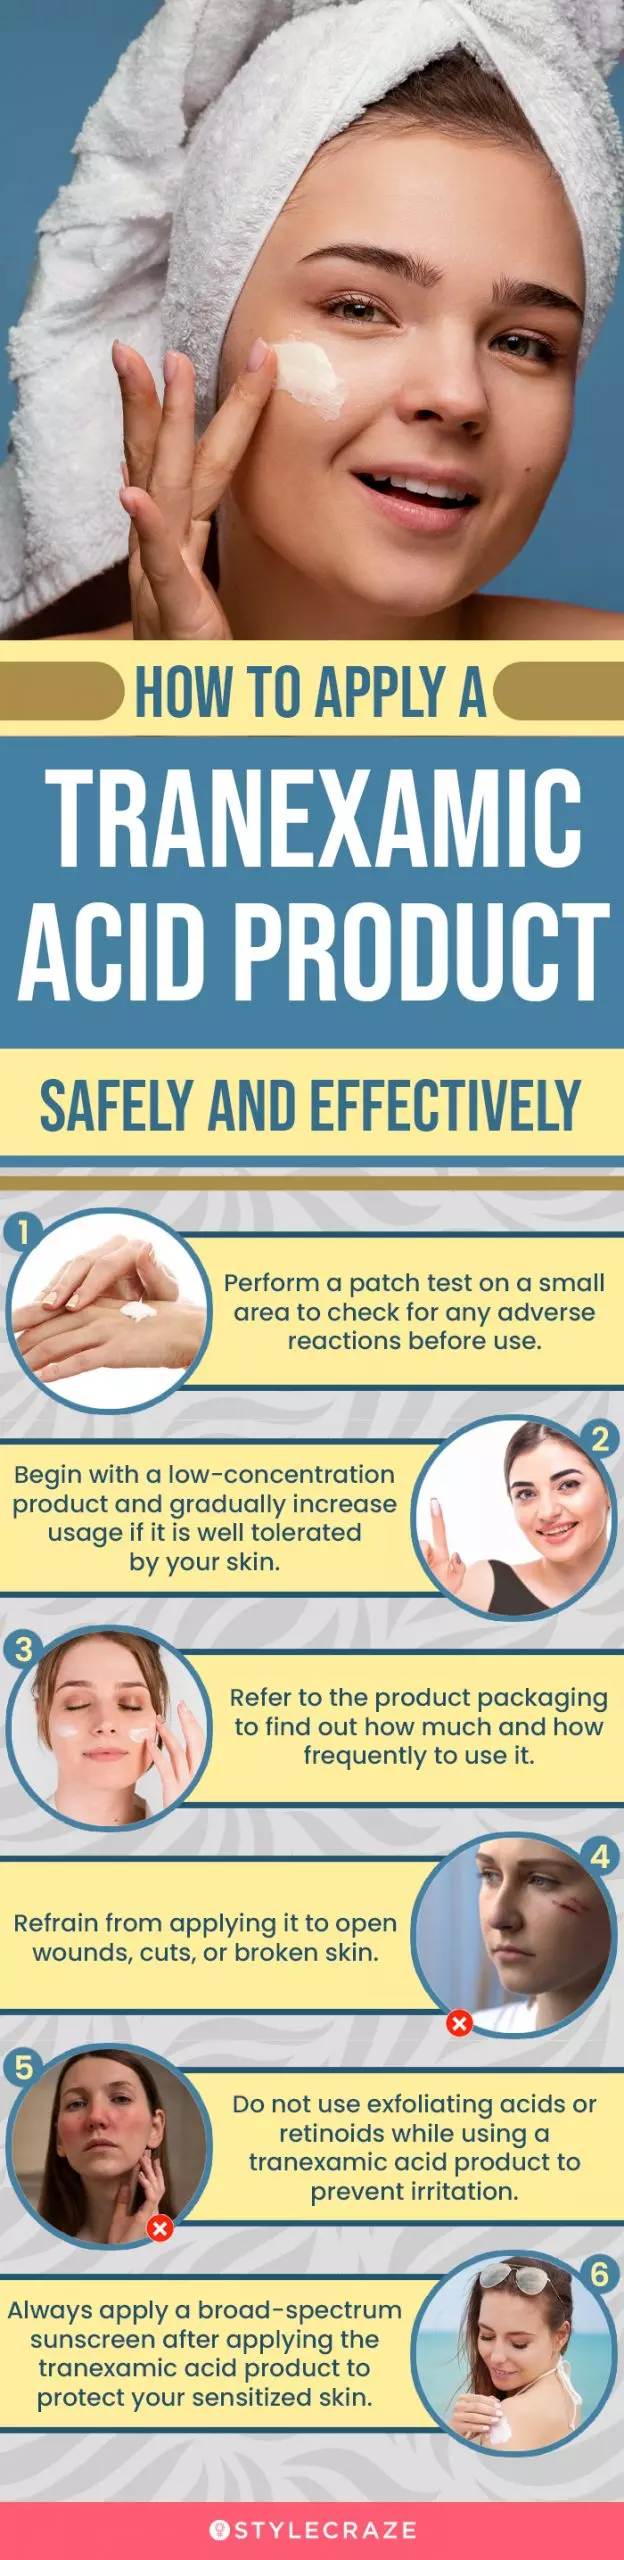 How To Apply A Tranexamic Acid Product Safely And Effectively (infographic)